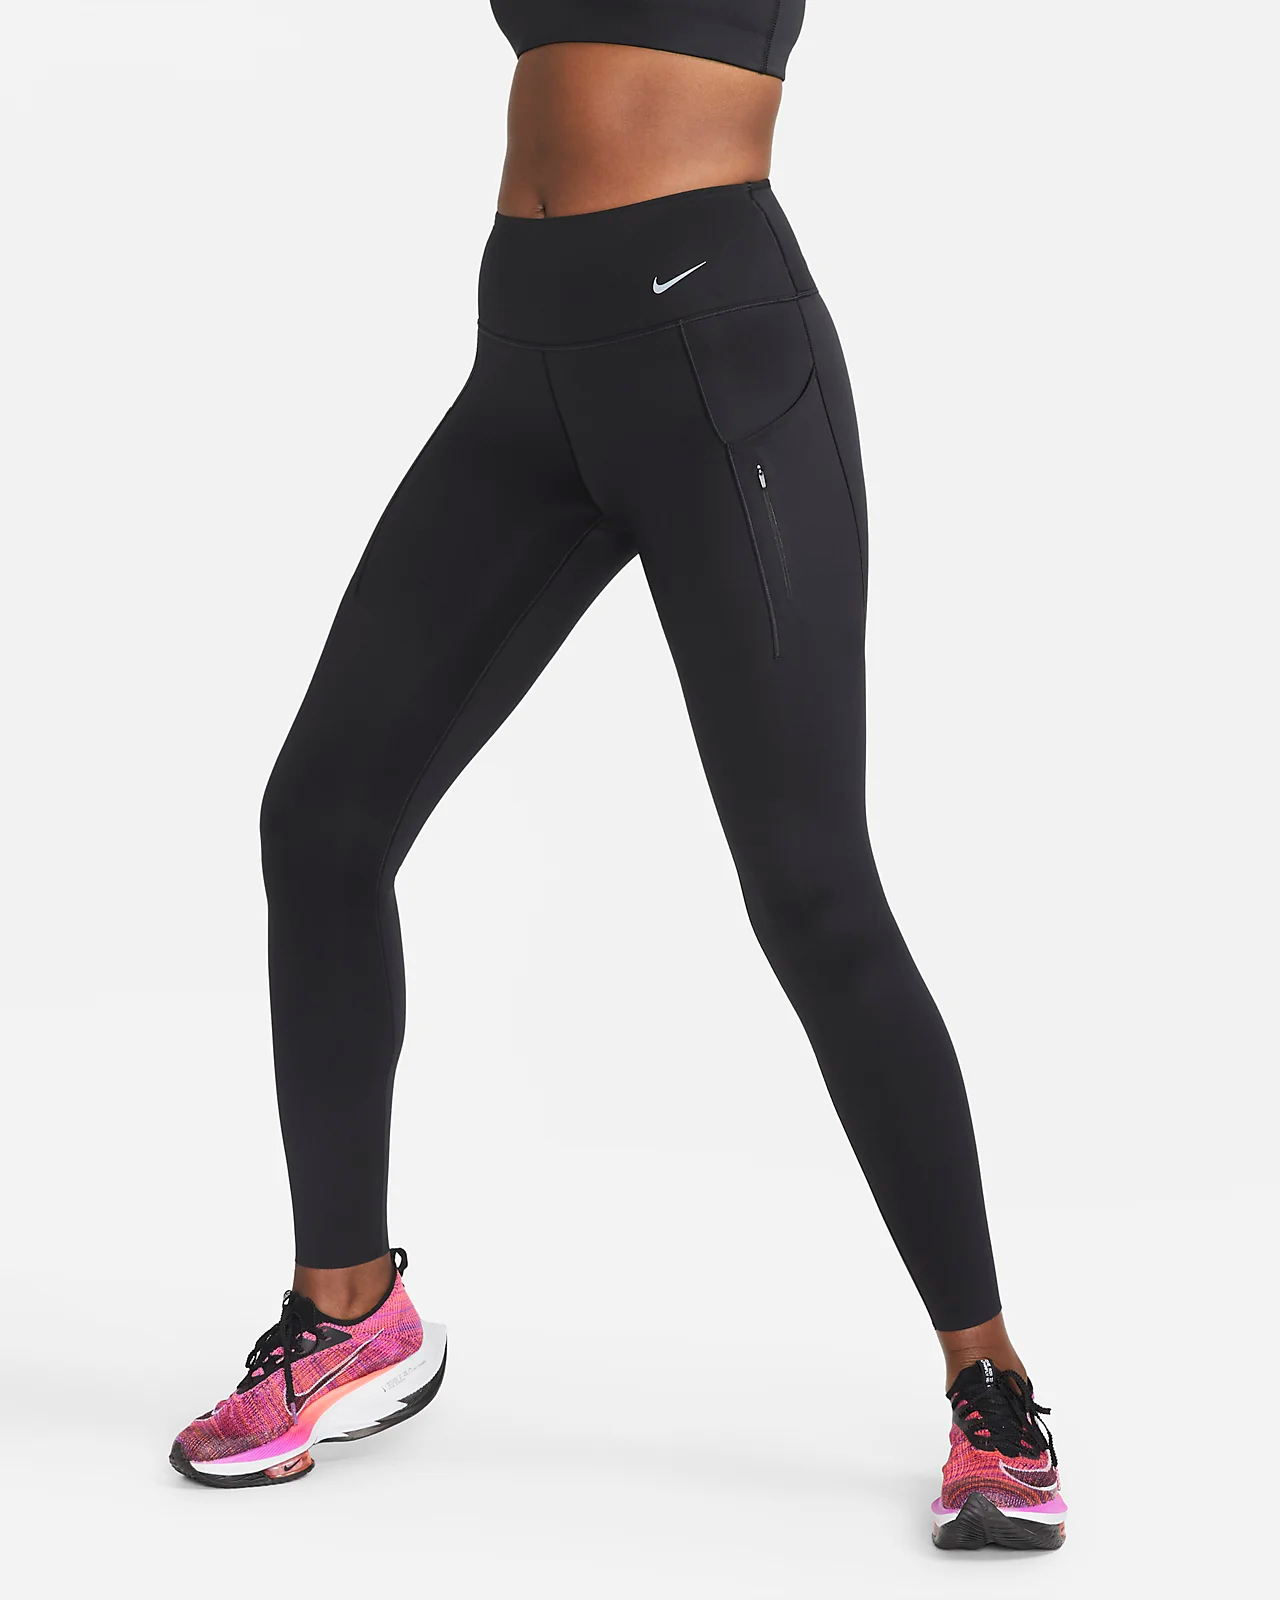 Women nike leggings, in the realm of athletic wear, few items are as ubiquitous and essential as leggings. The evolution of leggings has seen them